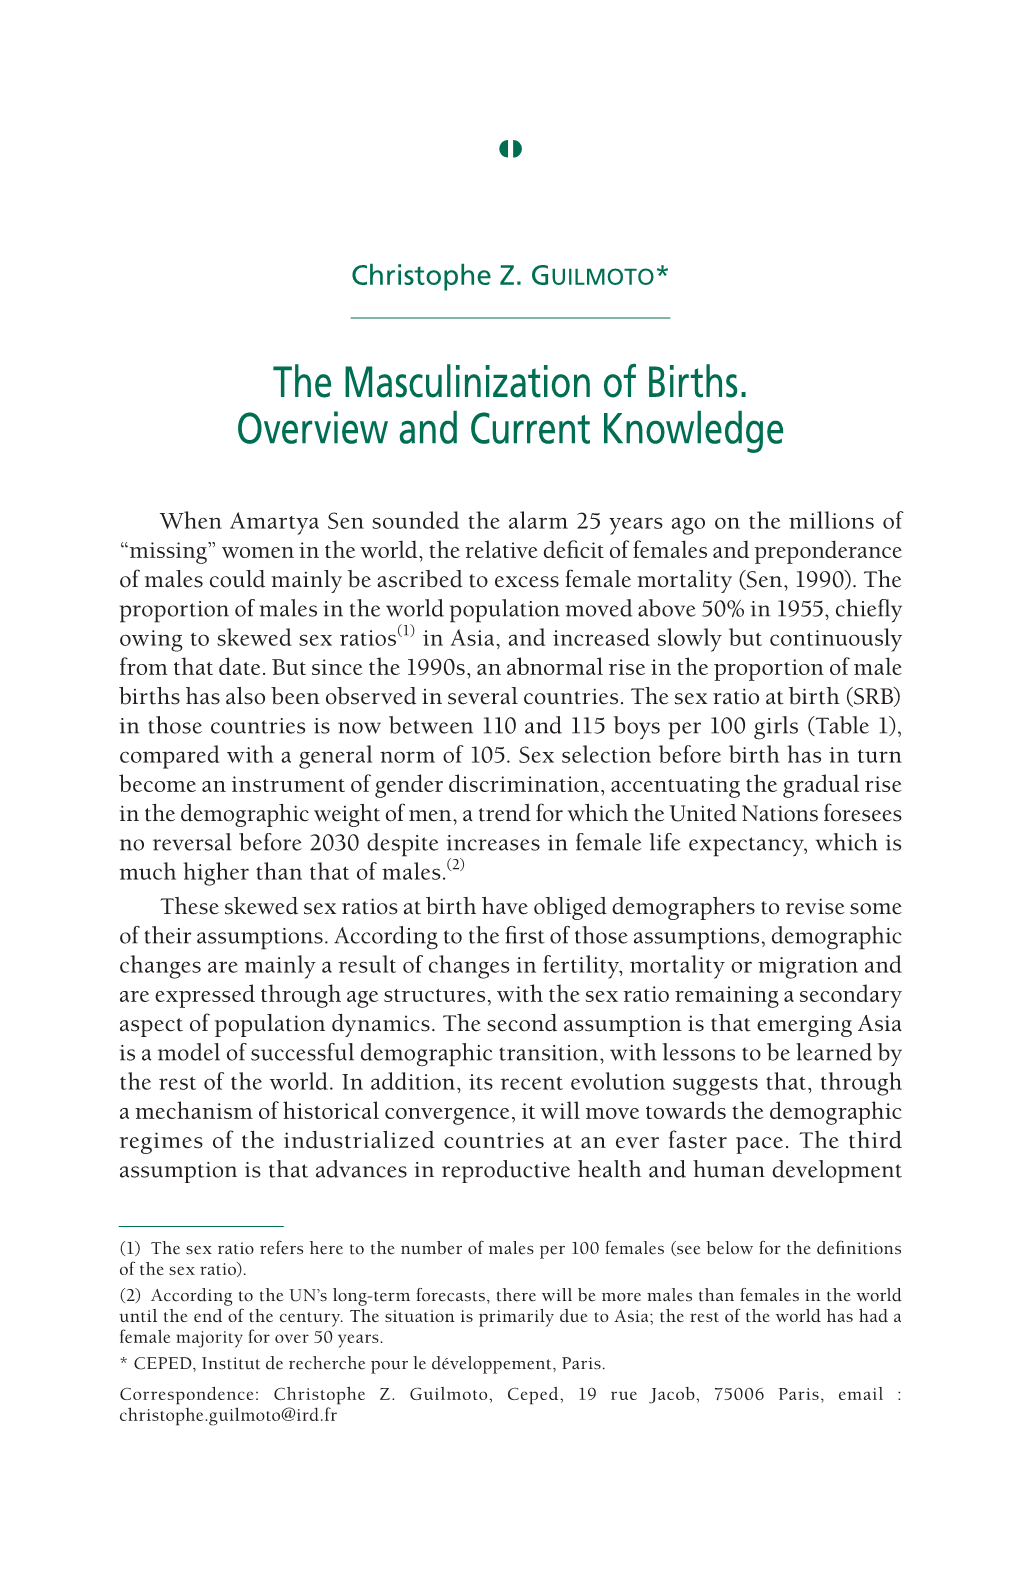 The Masculinization of Births. Overview and Current Knowledge